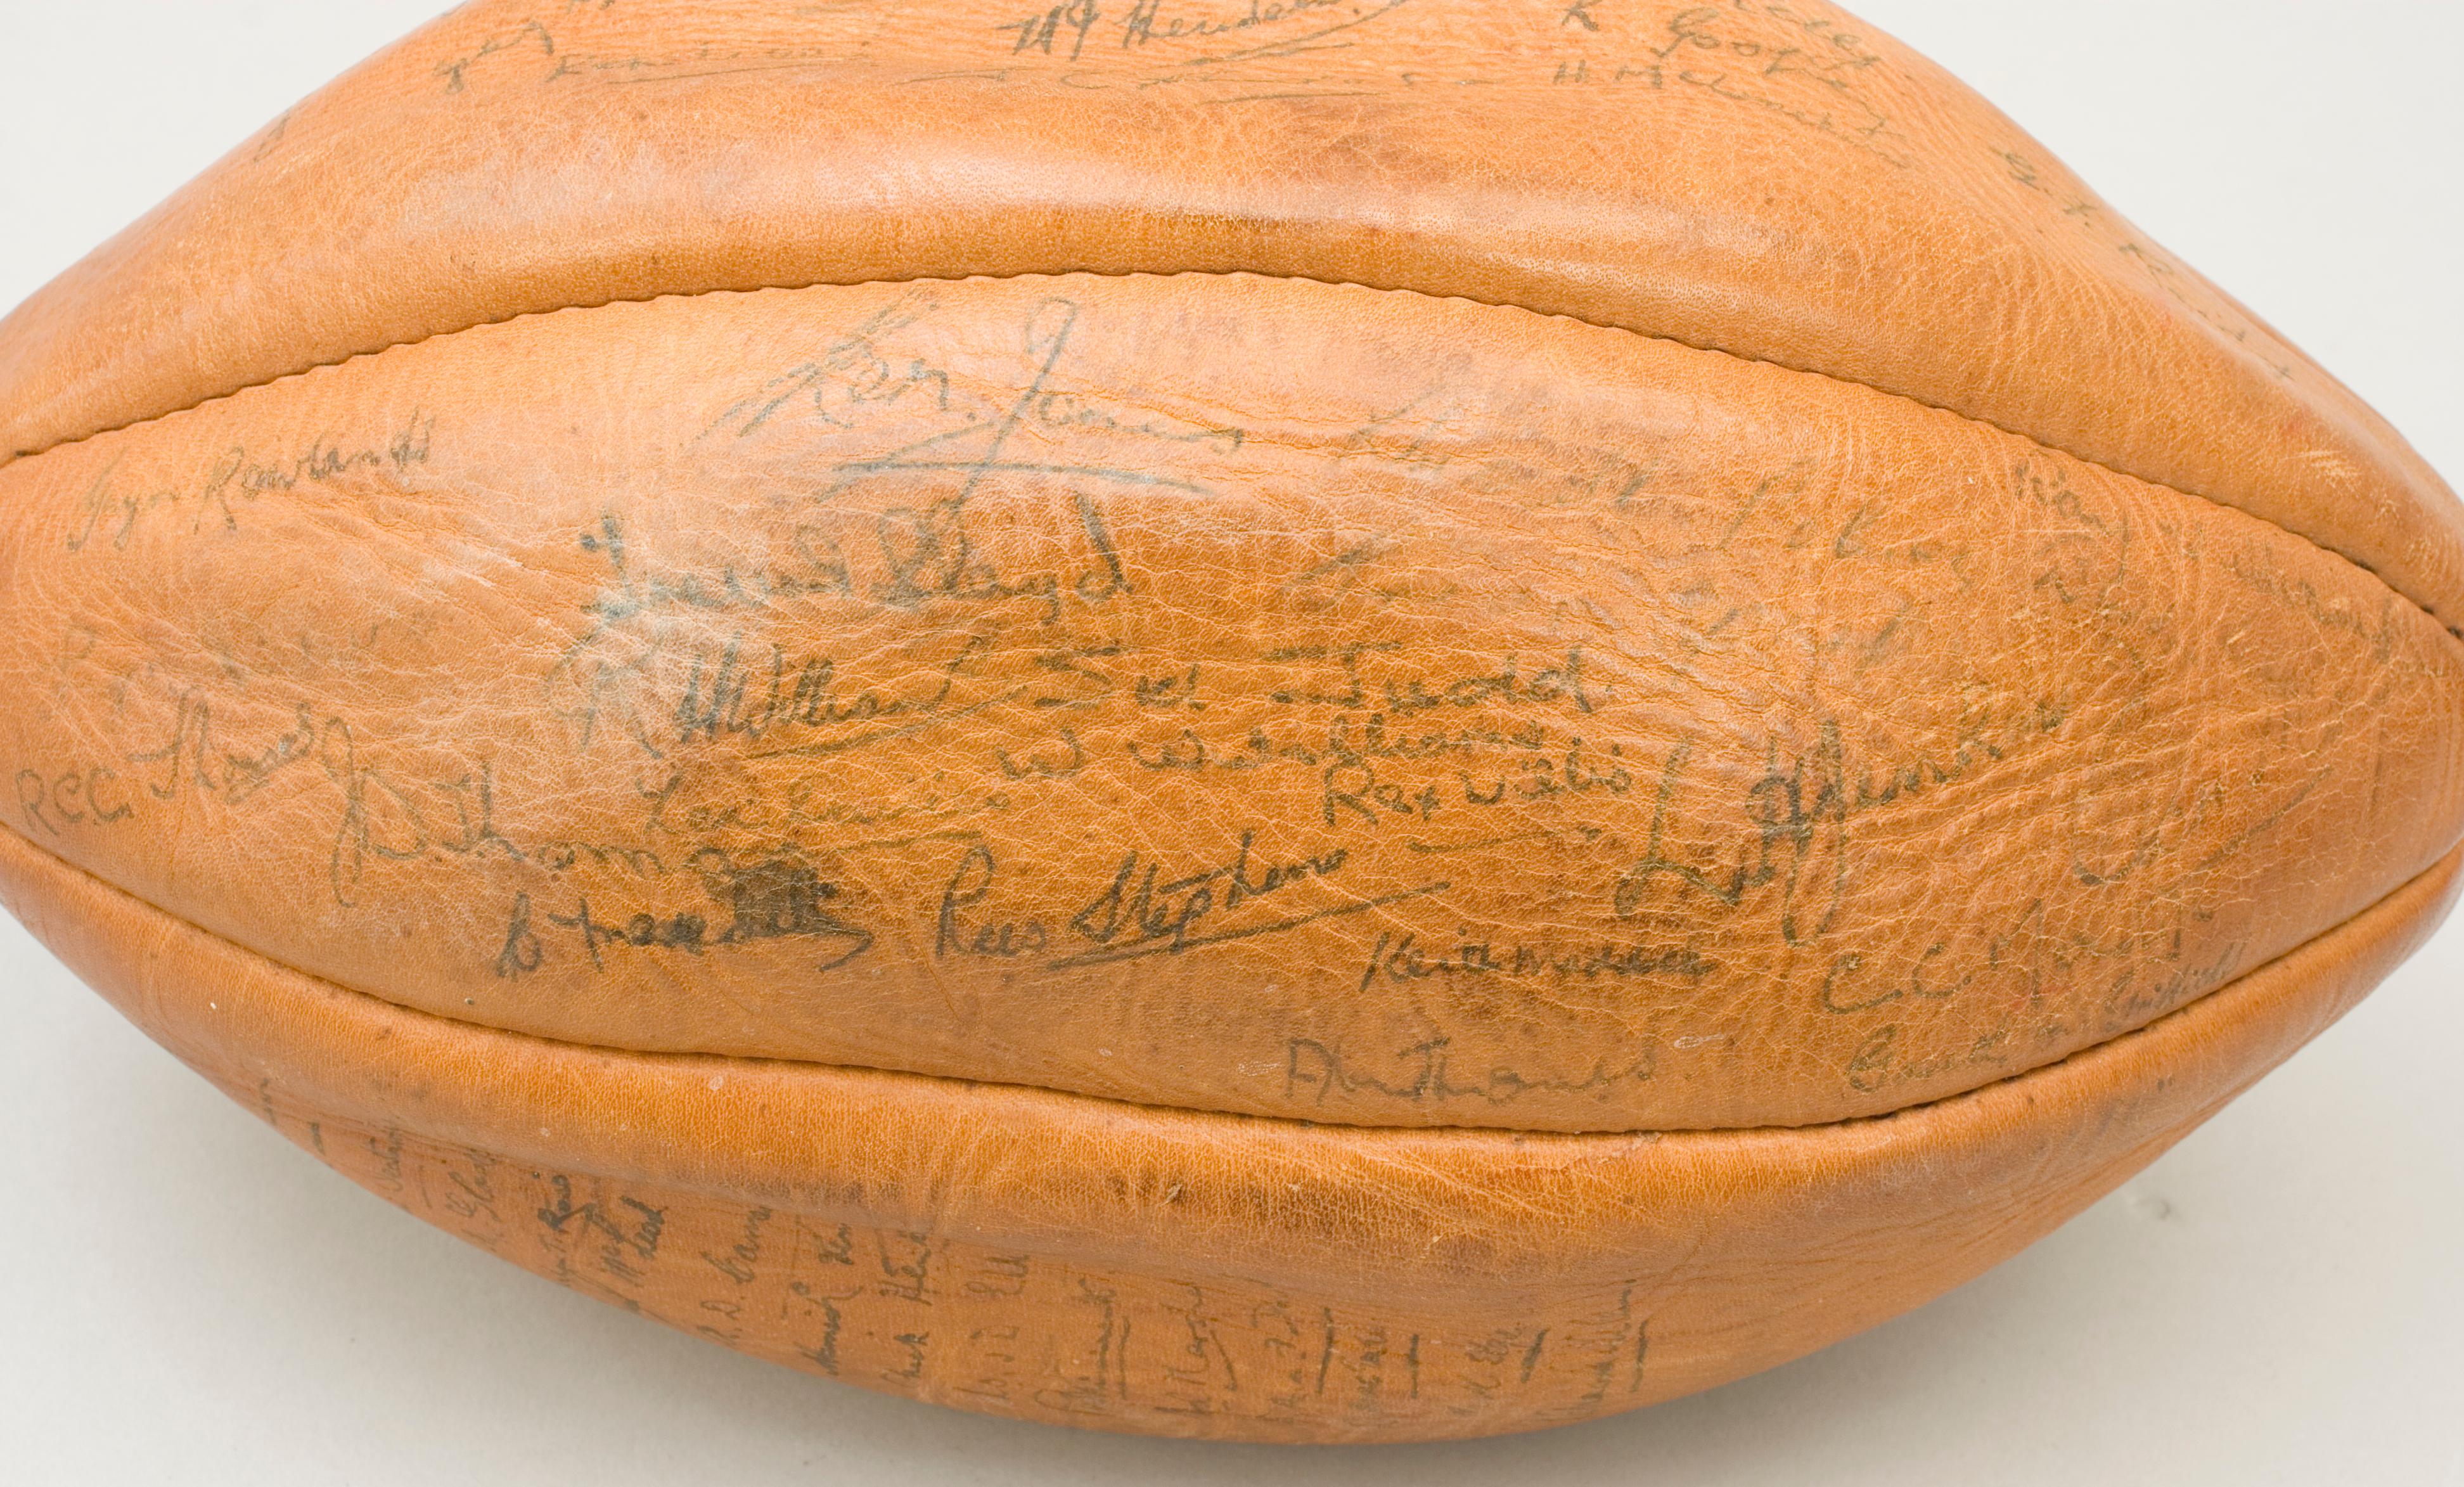 Leather Sykes Rugby Ball, Signed by 1954 England, Scotland, Wales & Ireland Rugby Teams